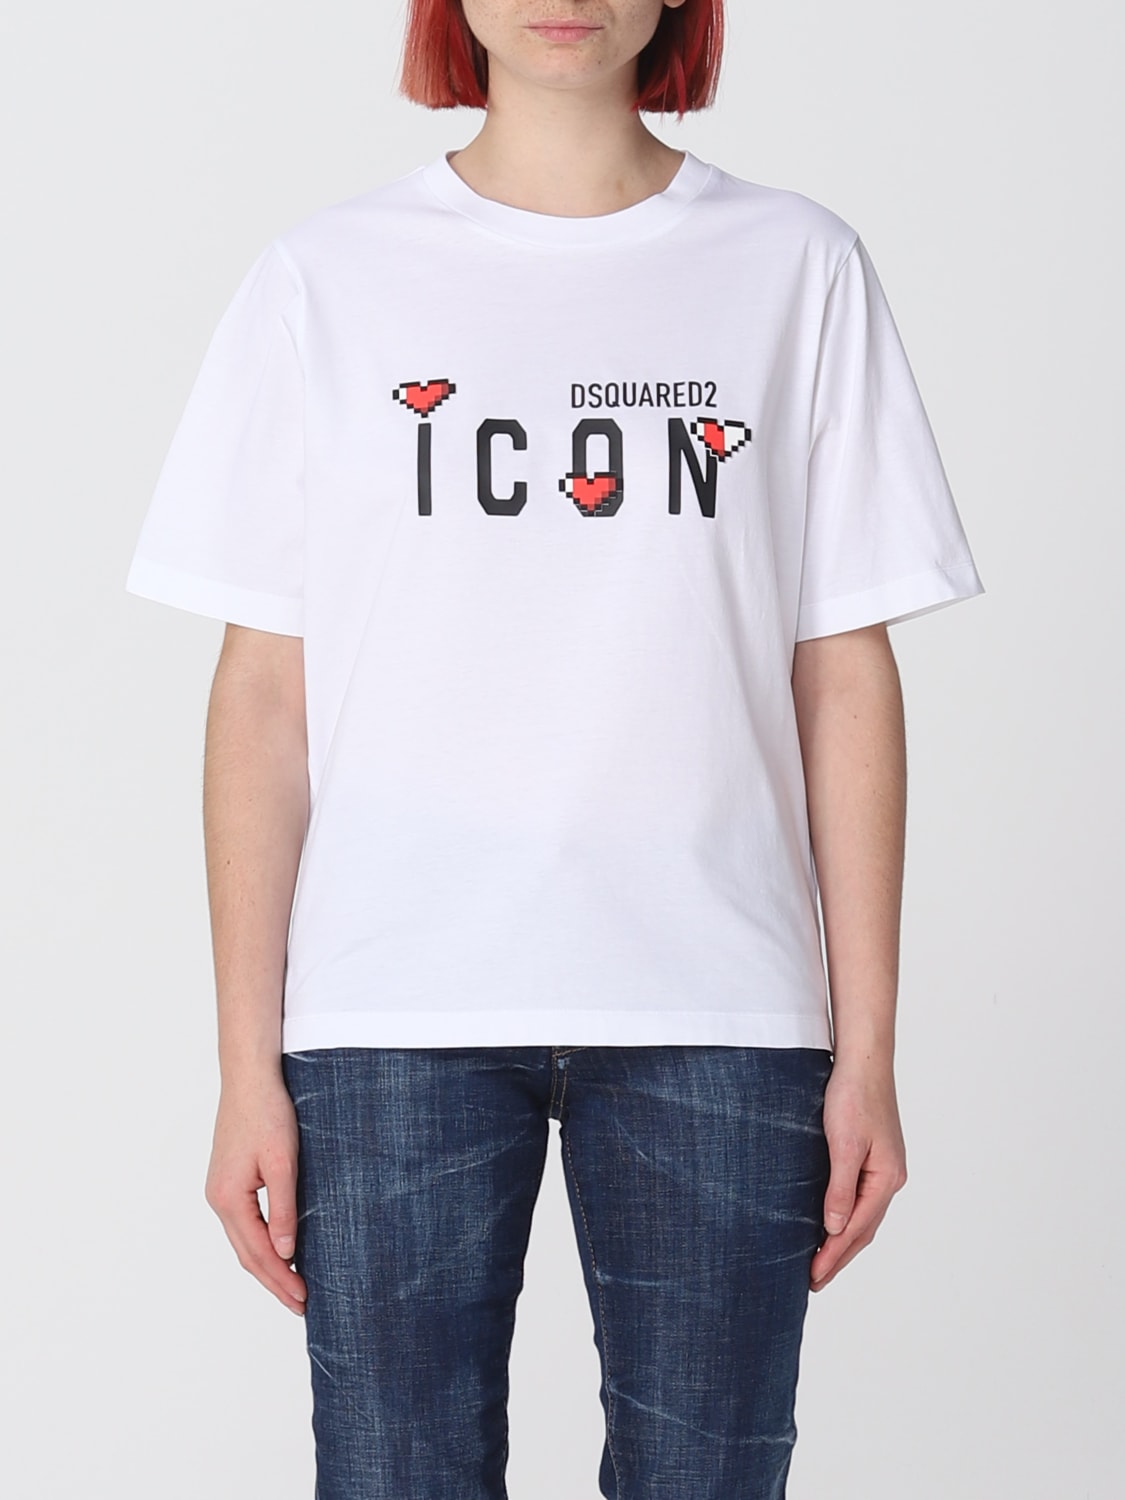 DSQUARED2: Icon T-shirt in cotton - White  Dsquared2 t-shirt  S80GC0059S23009 online at